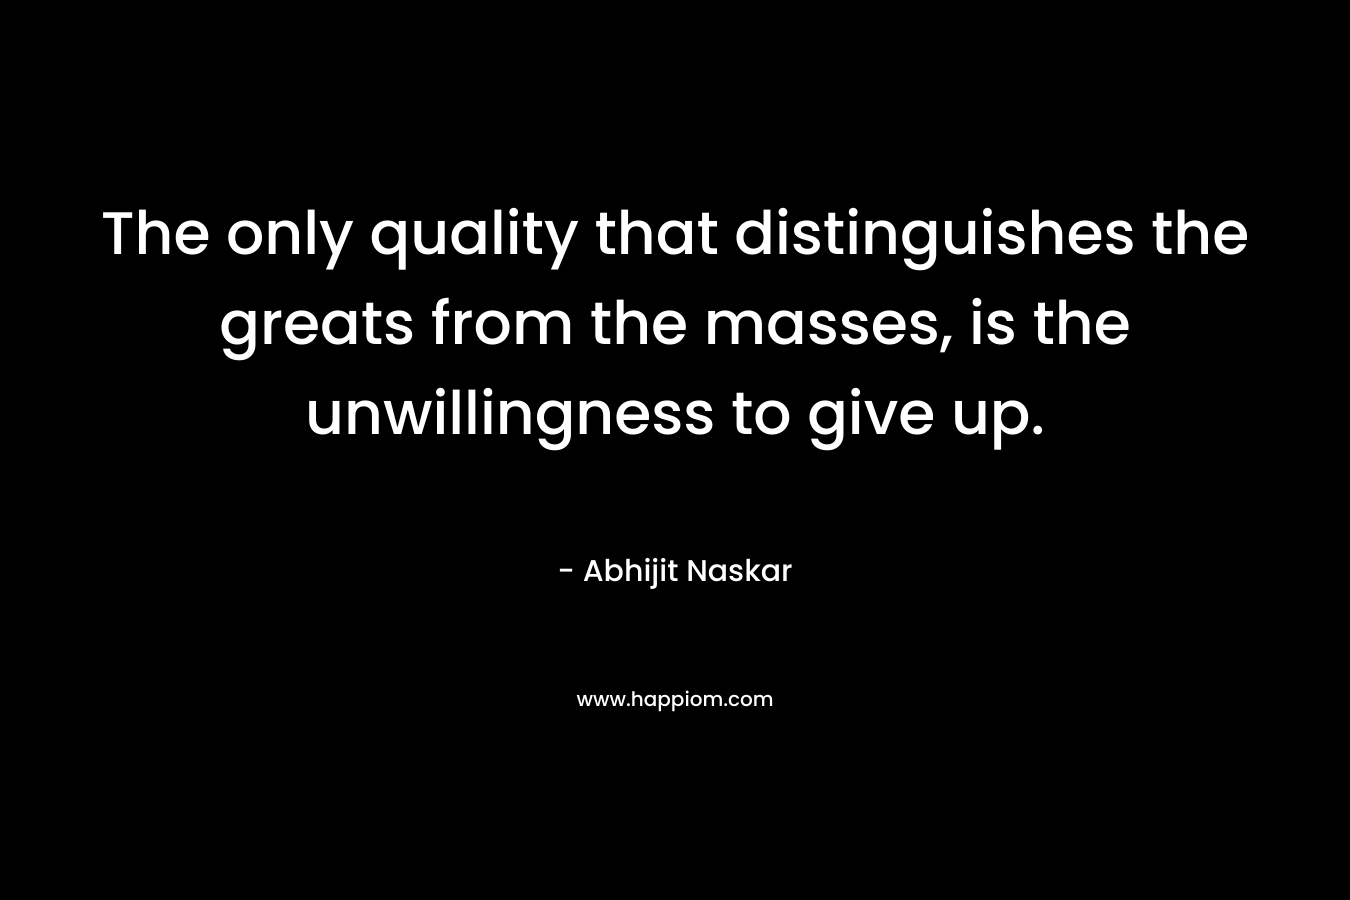 The only quality that distinguishes the greats from the masses, is the unwillingness to give up. – Abhijit Naskar